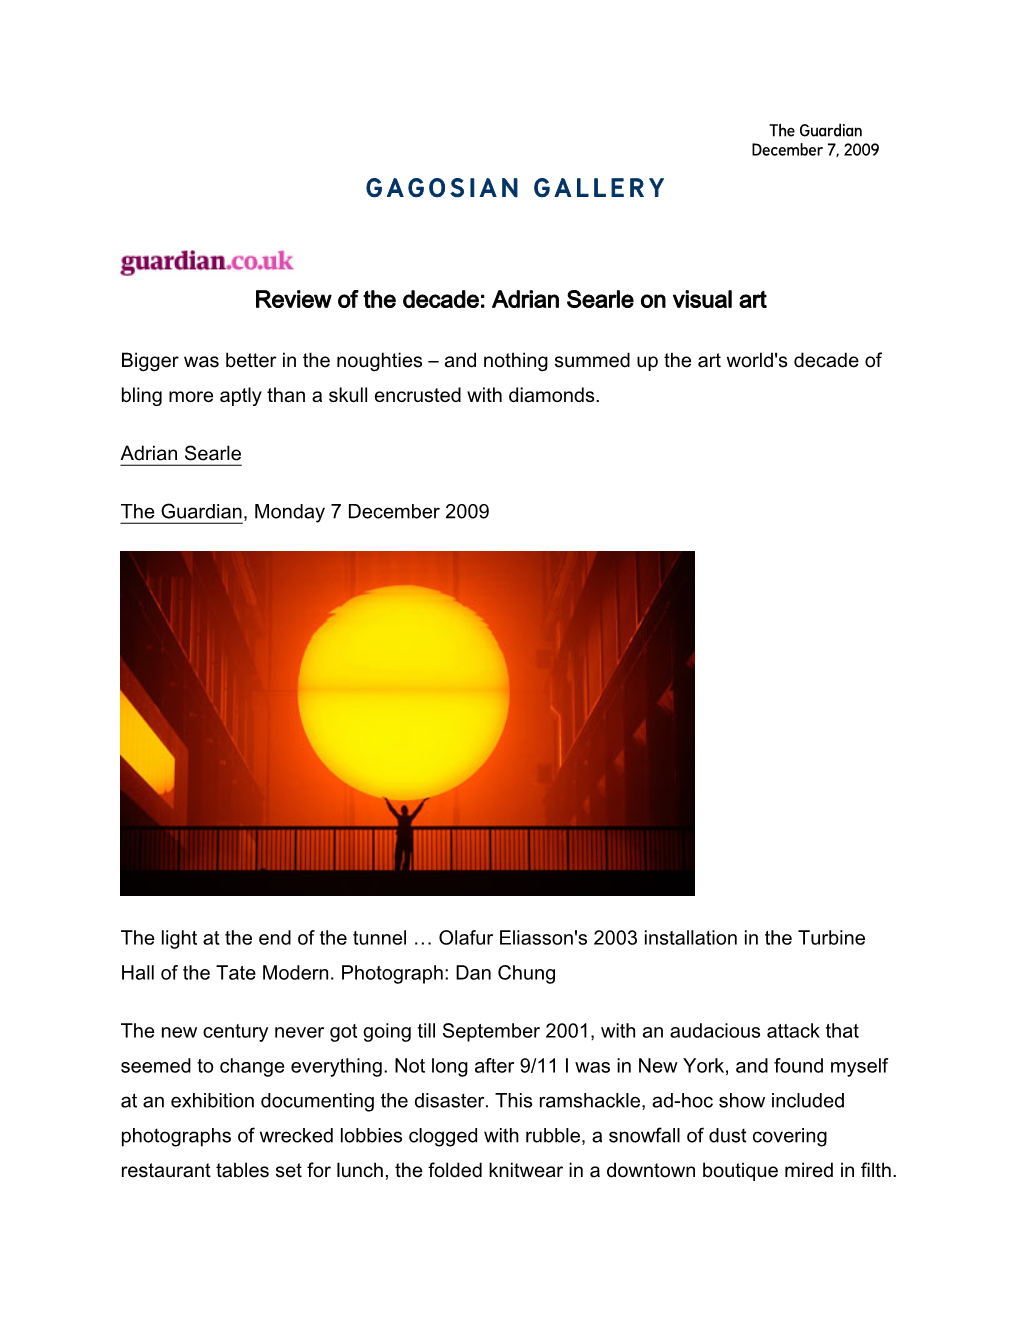 Review of the Decade: Adrian Searle on Visual Art